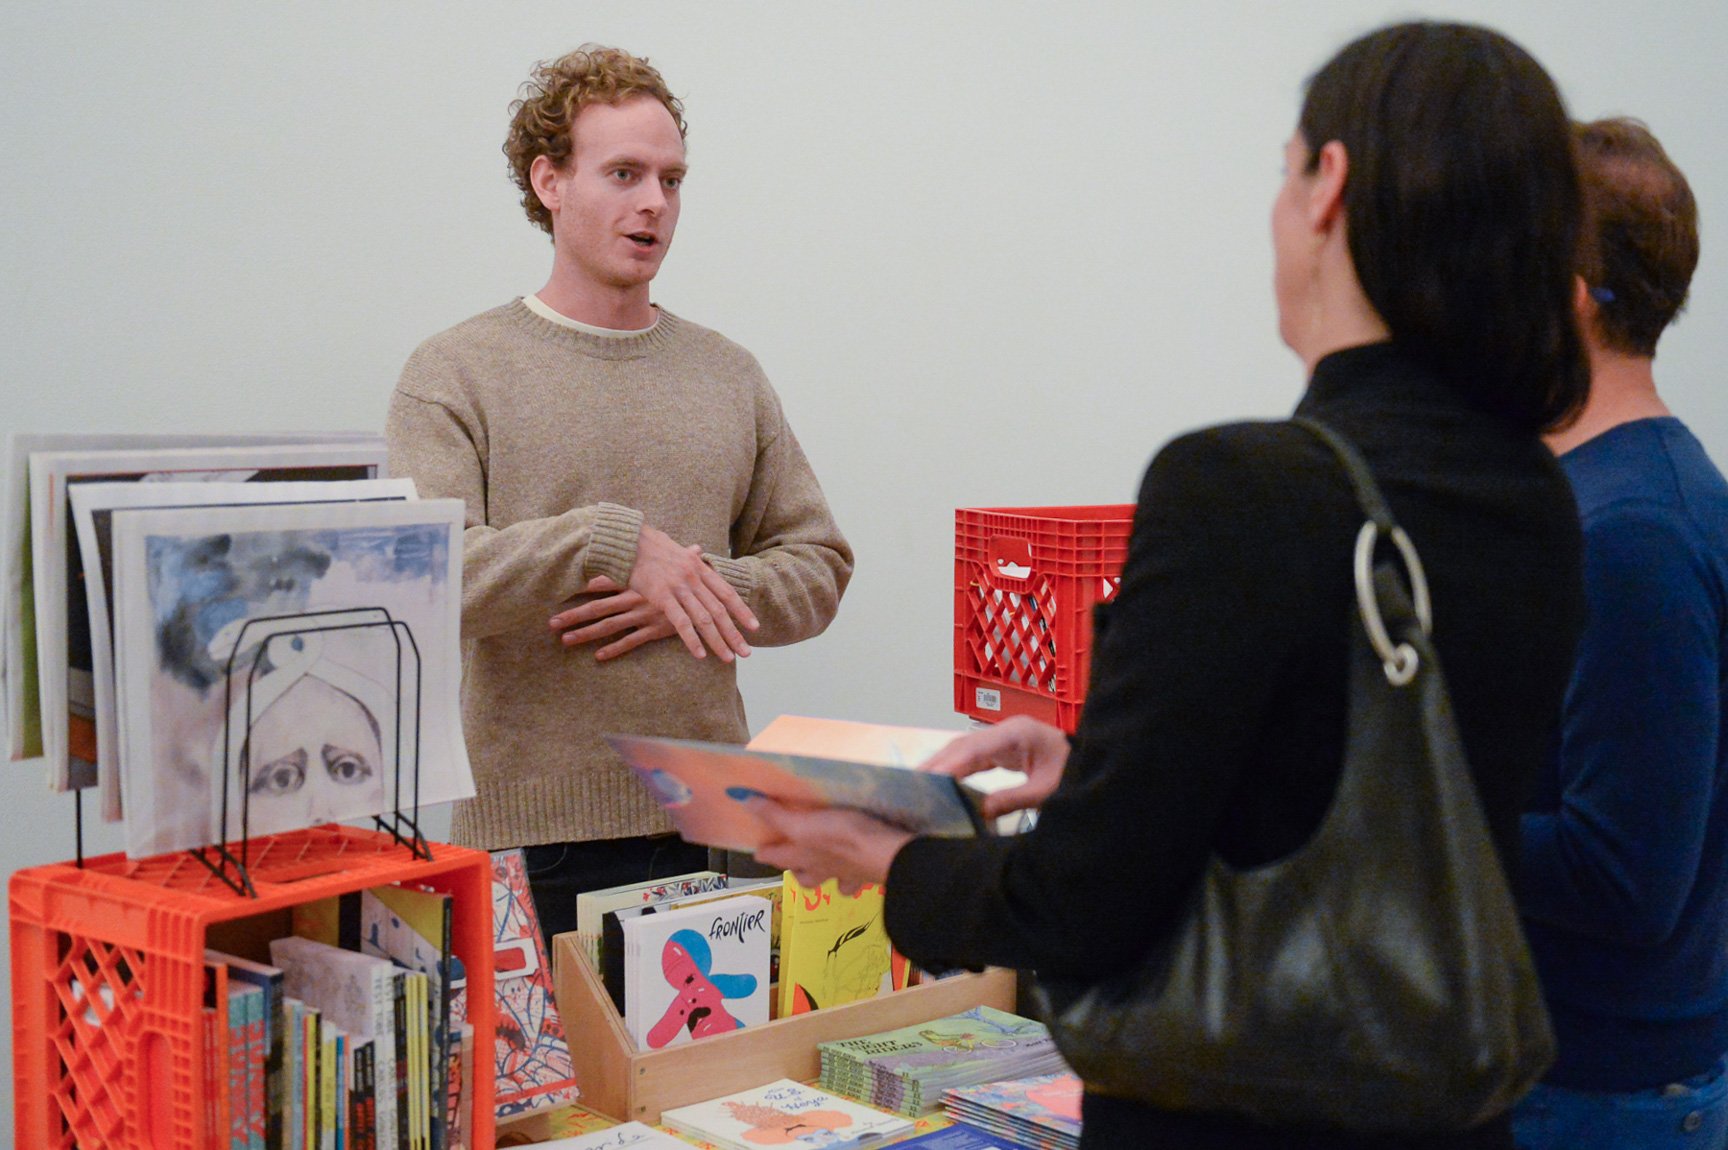 A vendor talks with visitors from behind their table filled with zines.